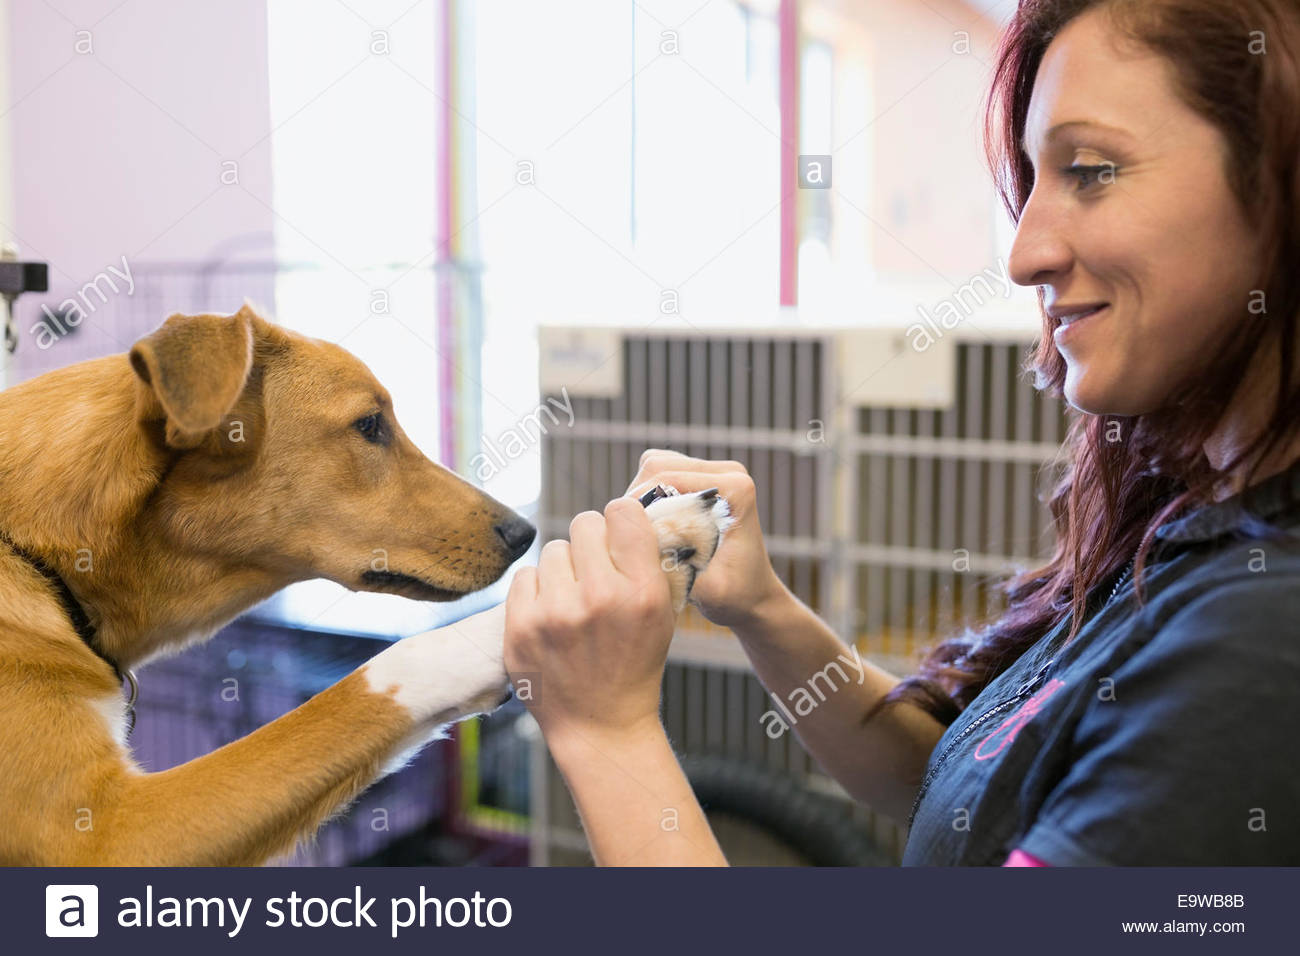 Dog groomer clipping dogs nails Stock Photo